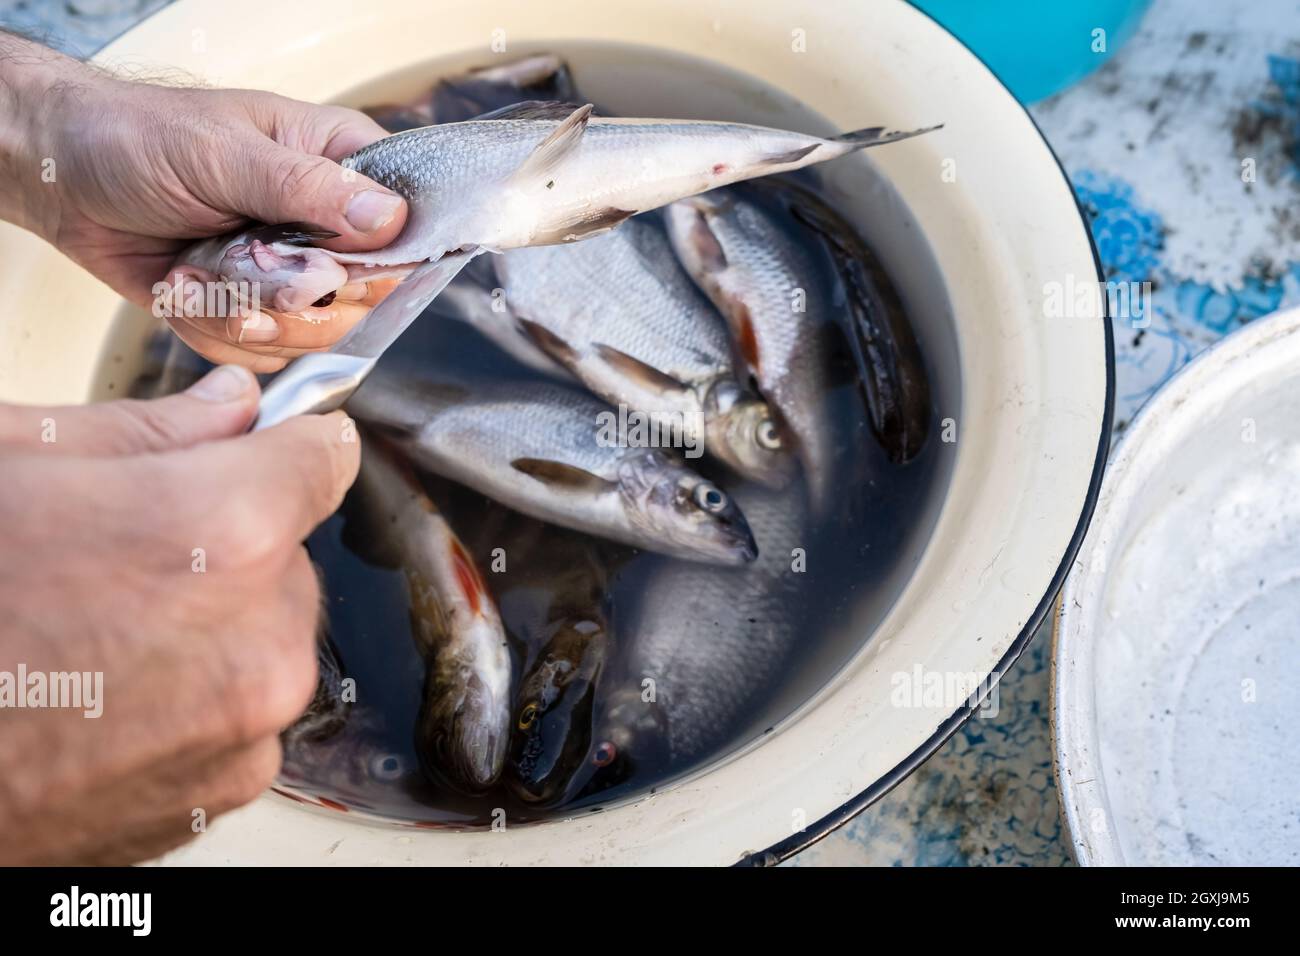 Hands cleanse fresh caught fish from the entrails, cut the belly with a knife, against the background of the catch in the basin.  Stock Photo